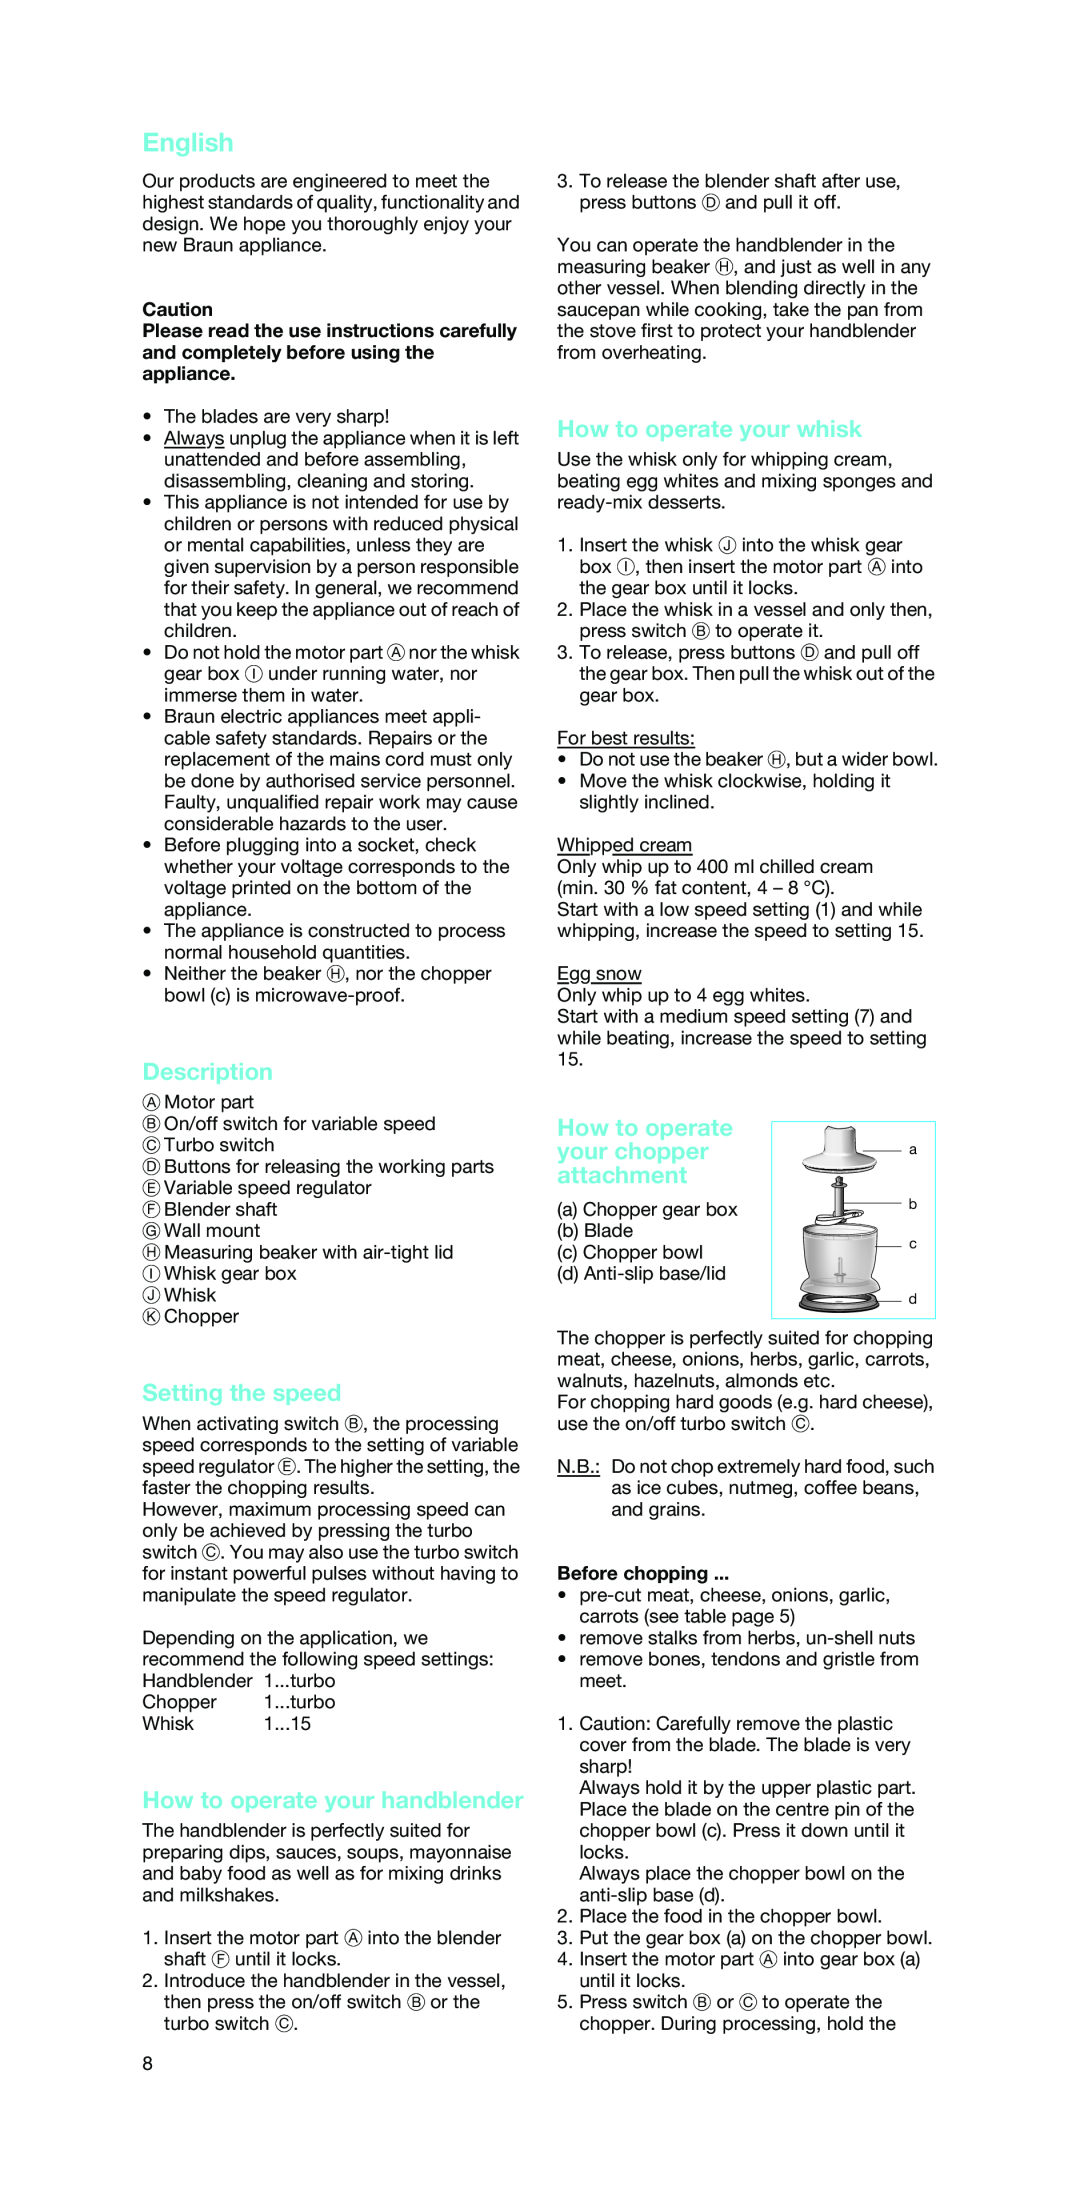 Braun MR 6500 M manual English, Description, Setting the speed, How to operate your handblender, How to operate your whisk 